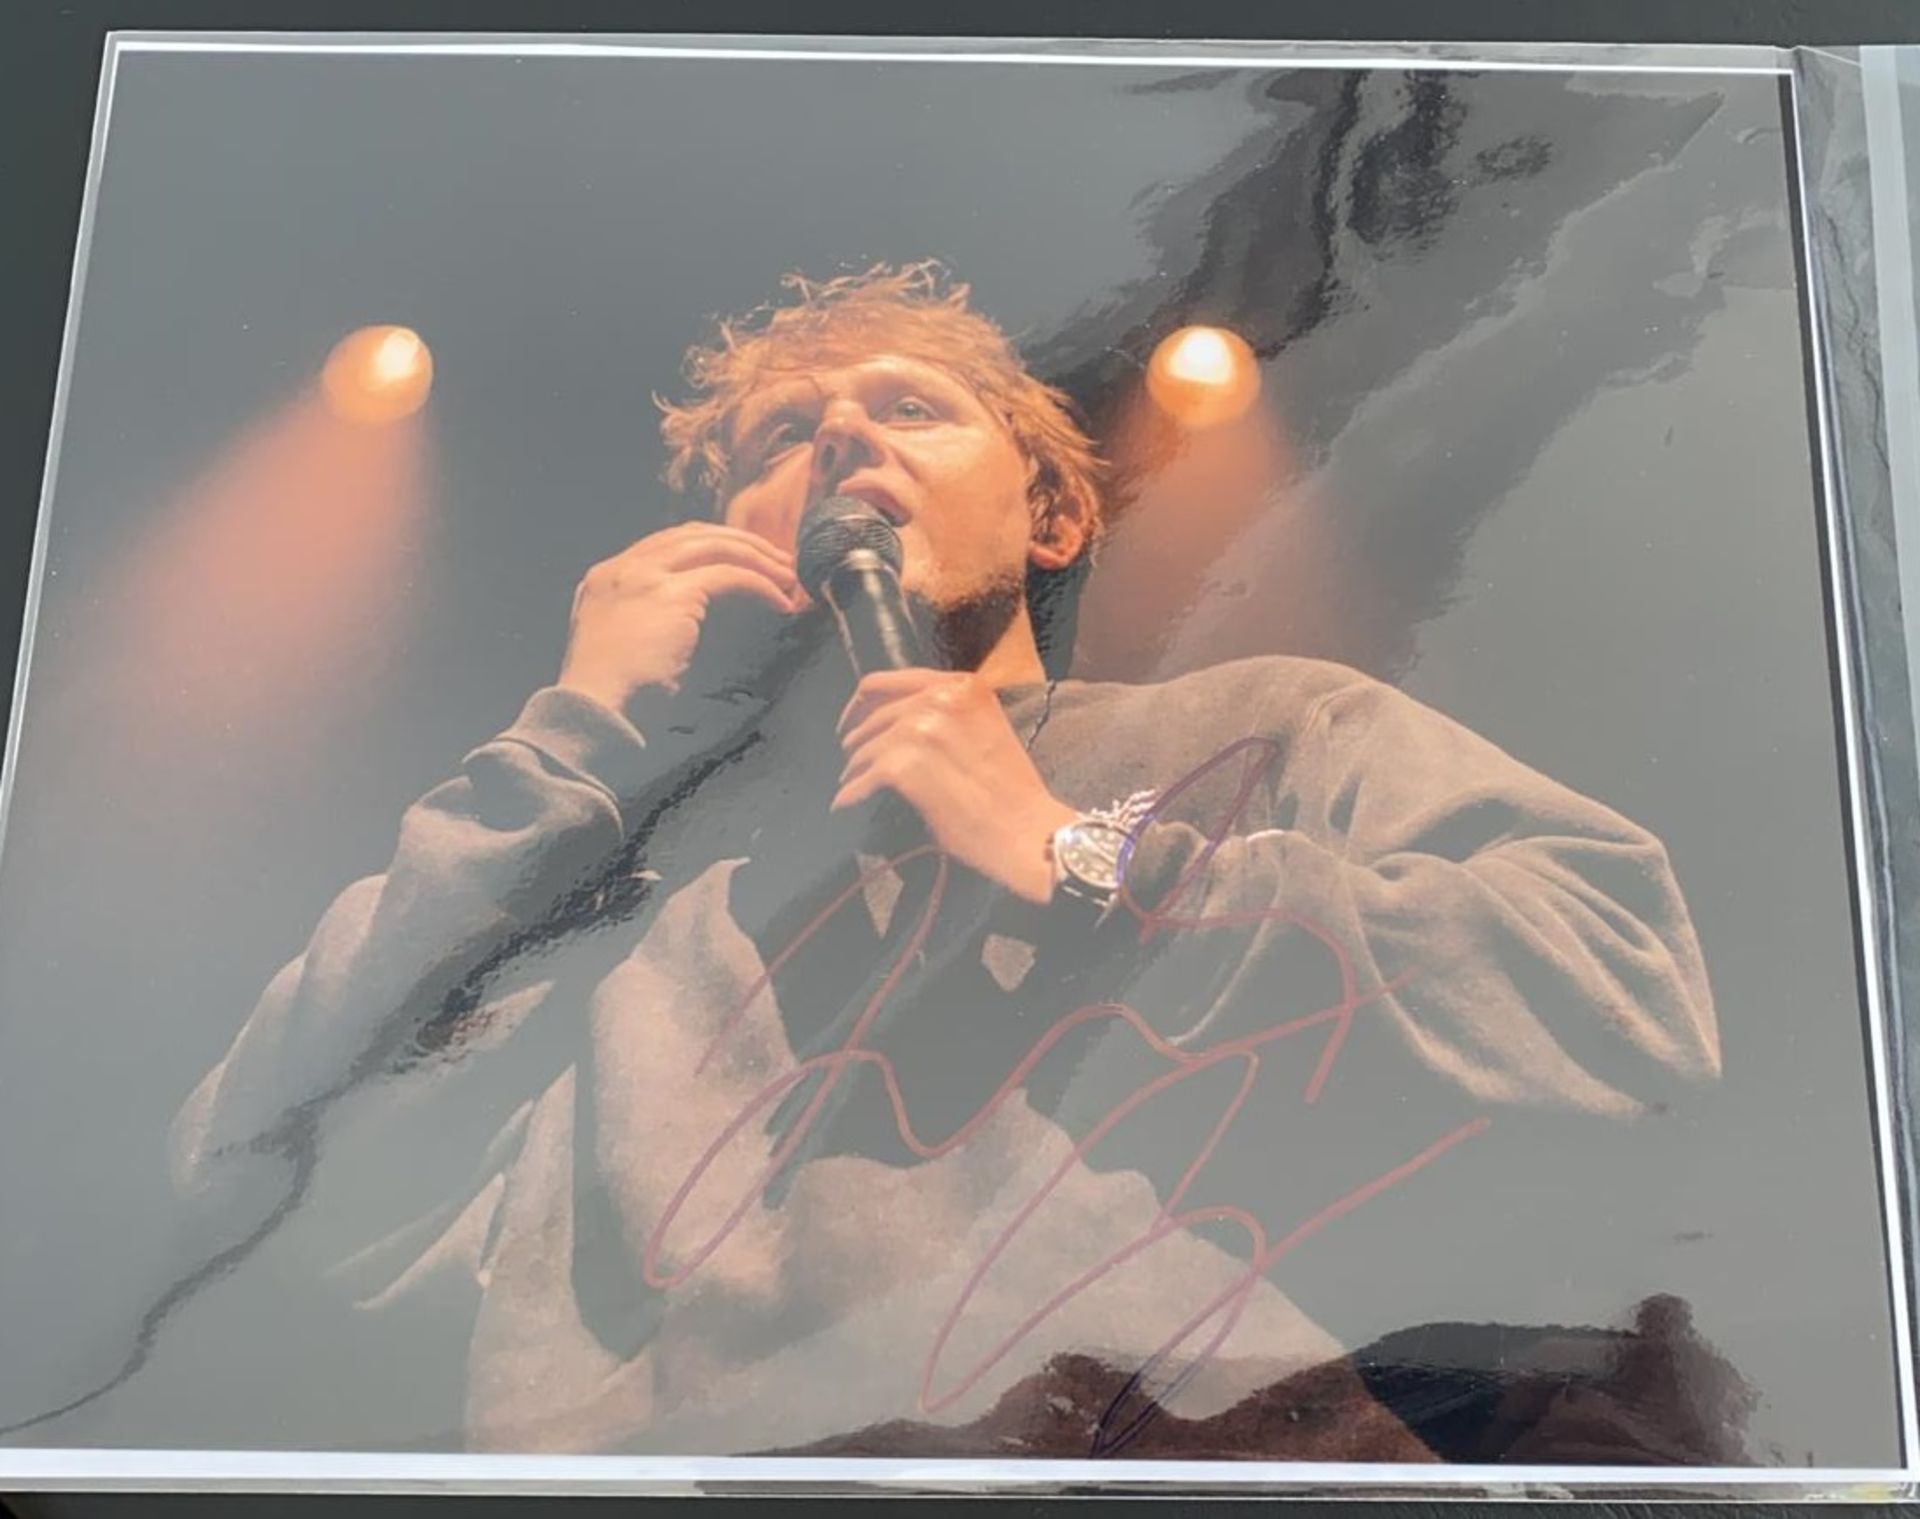 1 x Signed Autograph Picture - LEWIS CAPALDI - With COA - Size 12 x 8 Inch - NO VAT ON THE HAMMER - Image 2 of 3